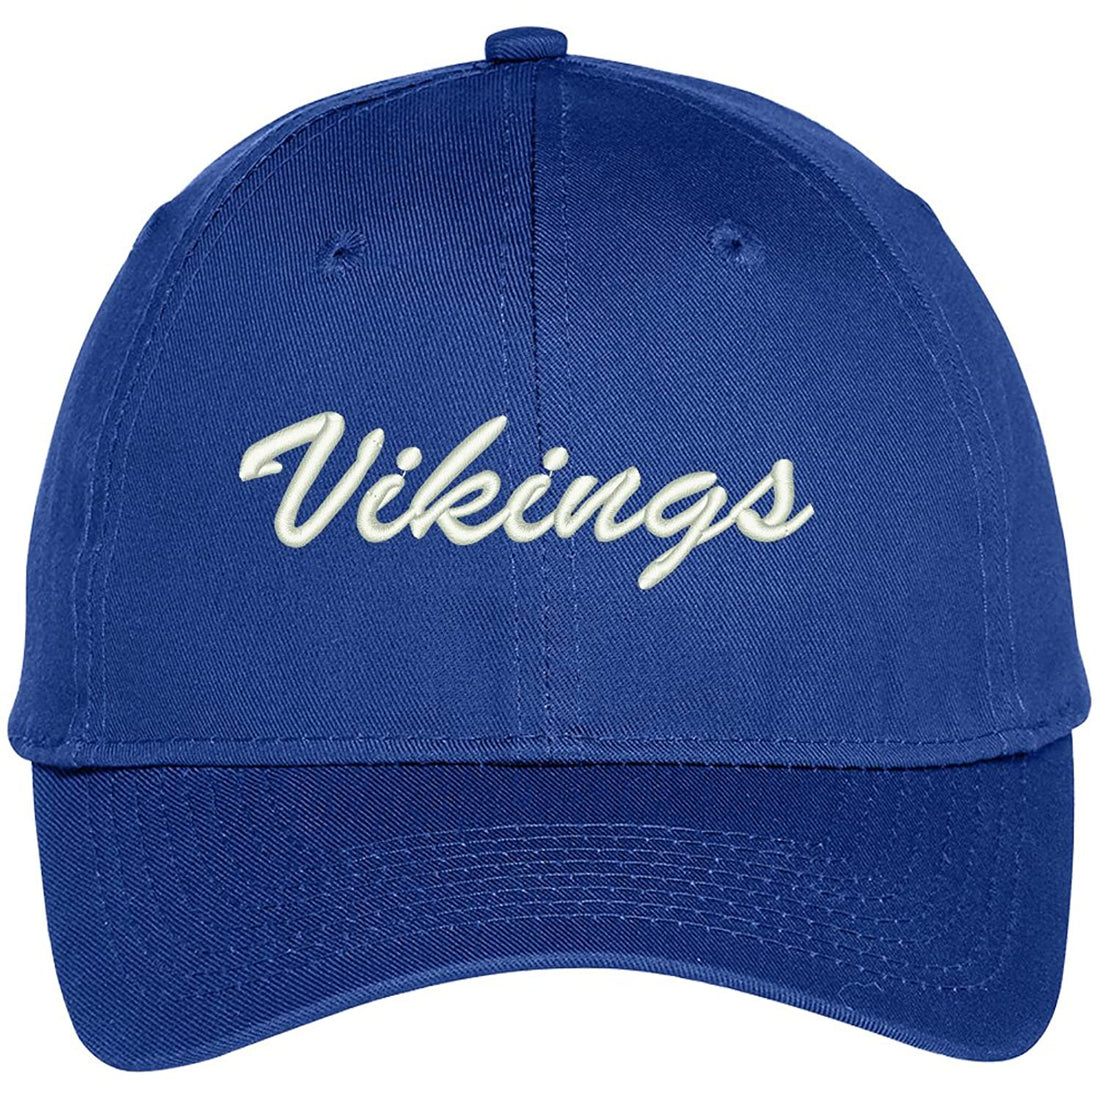 Trendy Apparel Shop Vikings Embroidered Precurved Adjustable Cap - Navy